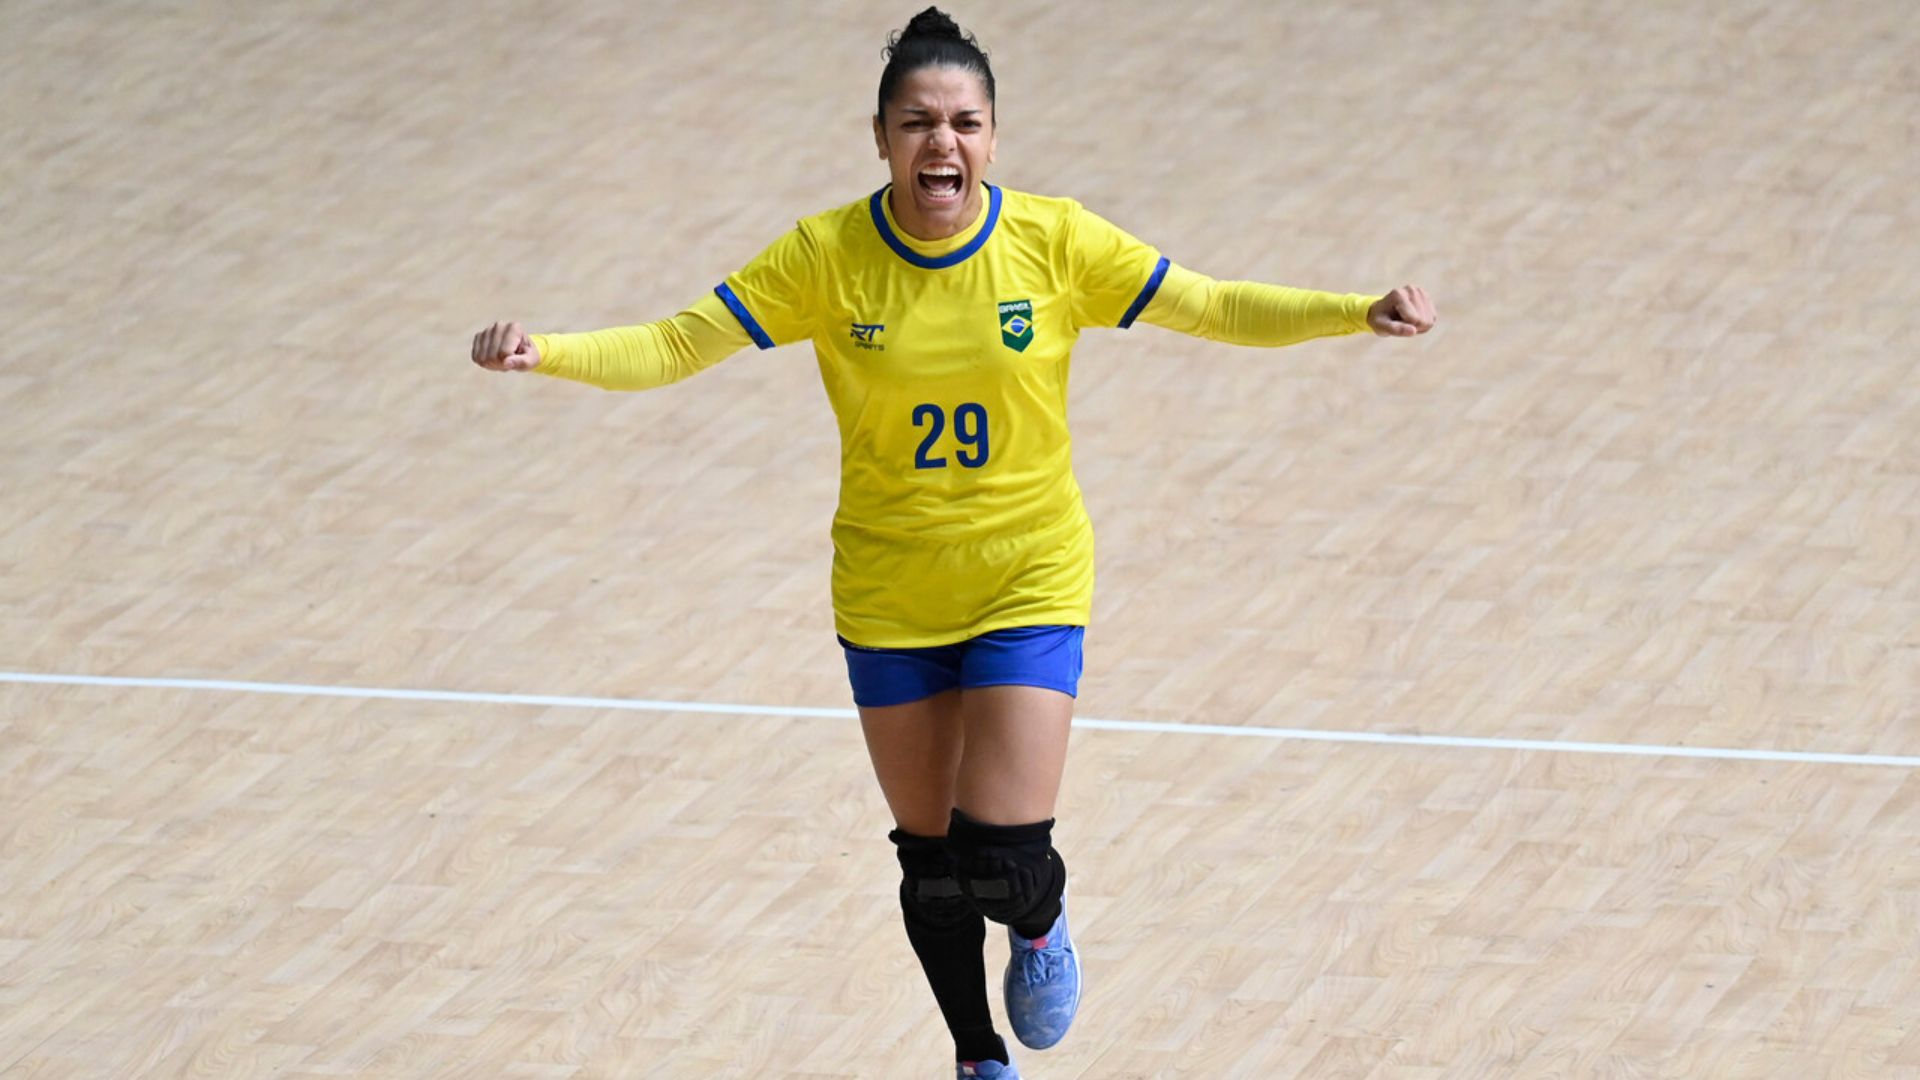 Handball: Brazil conquered the Pan American gold in the female's category